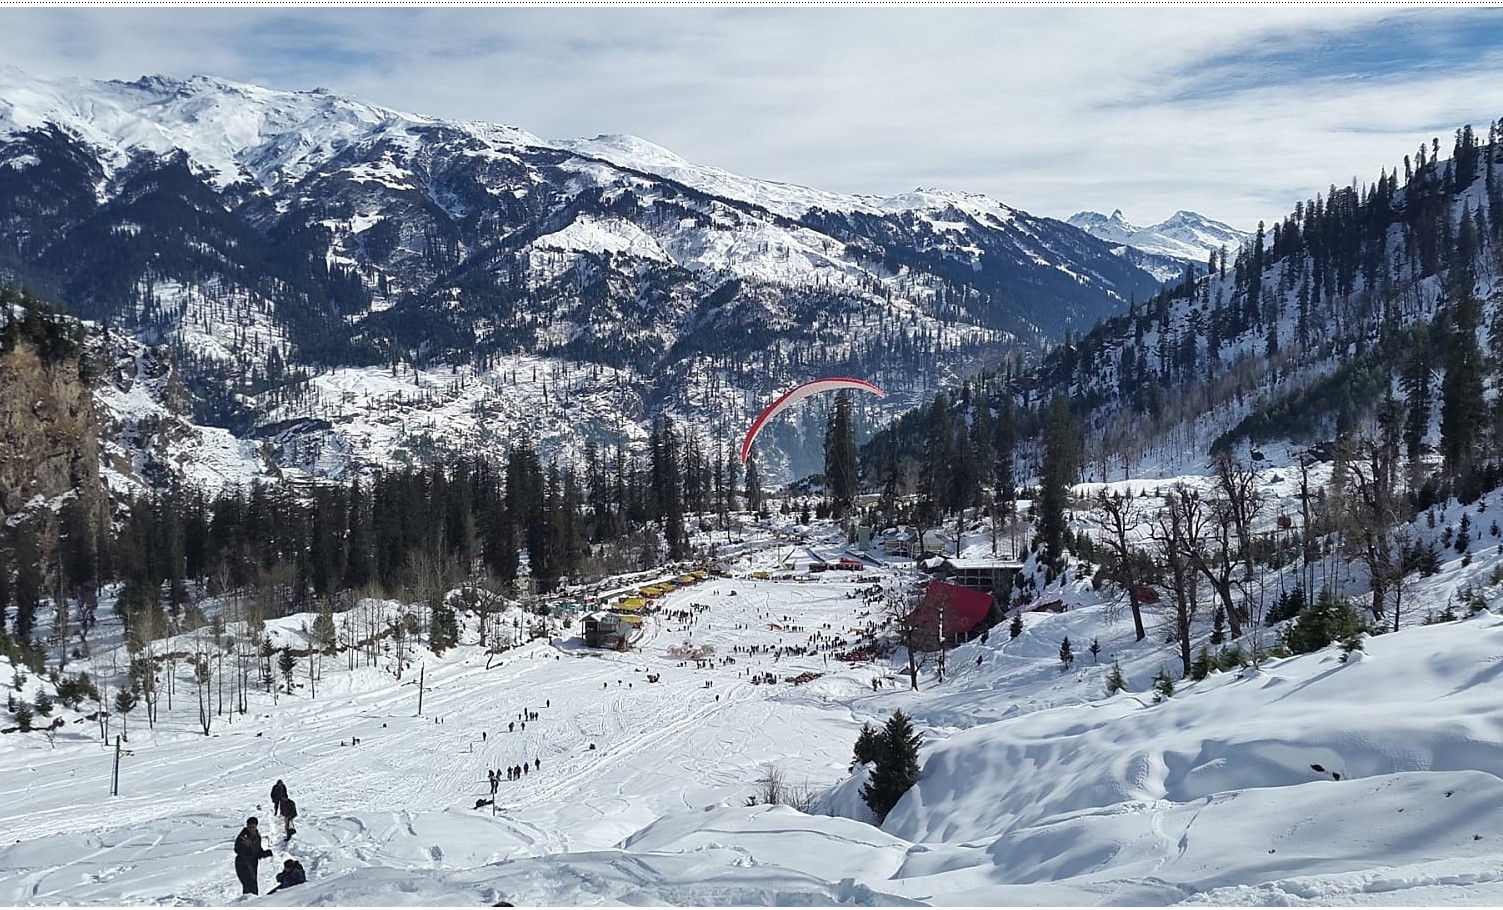 Places To Visit In Manali